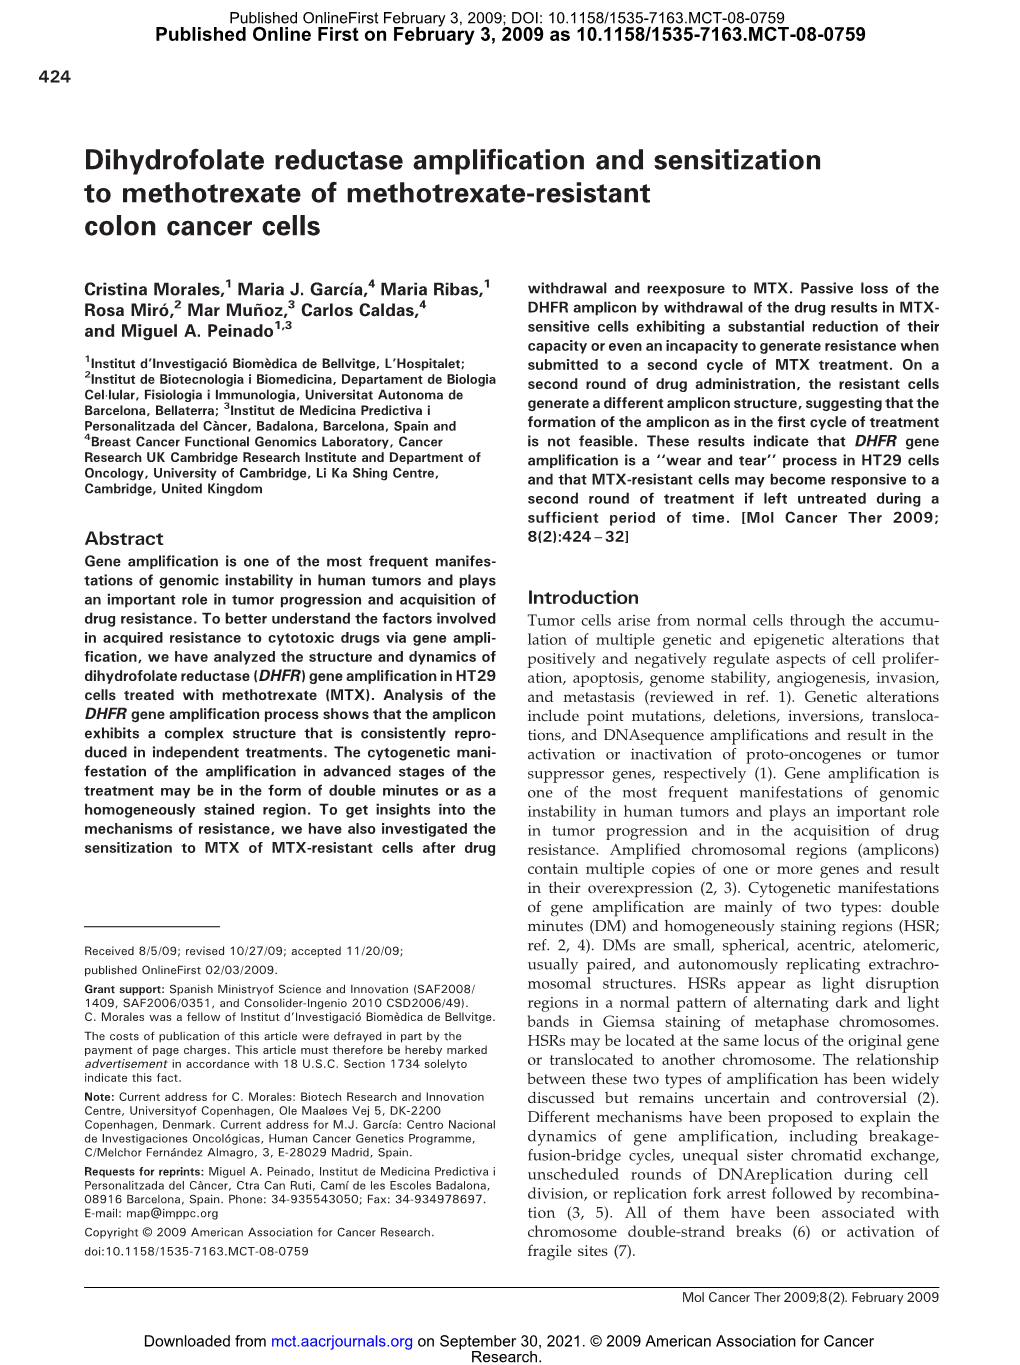 Dihydrofolate Reductase Amplification and Sensitization to Methotrexate of Methotrexate-Resistant Colon Cancer Cells